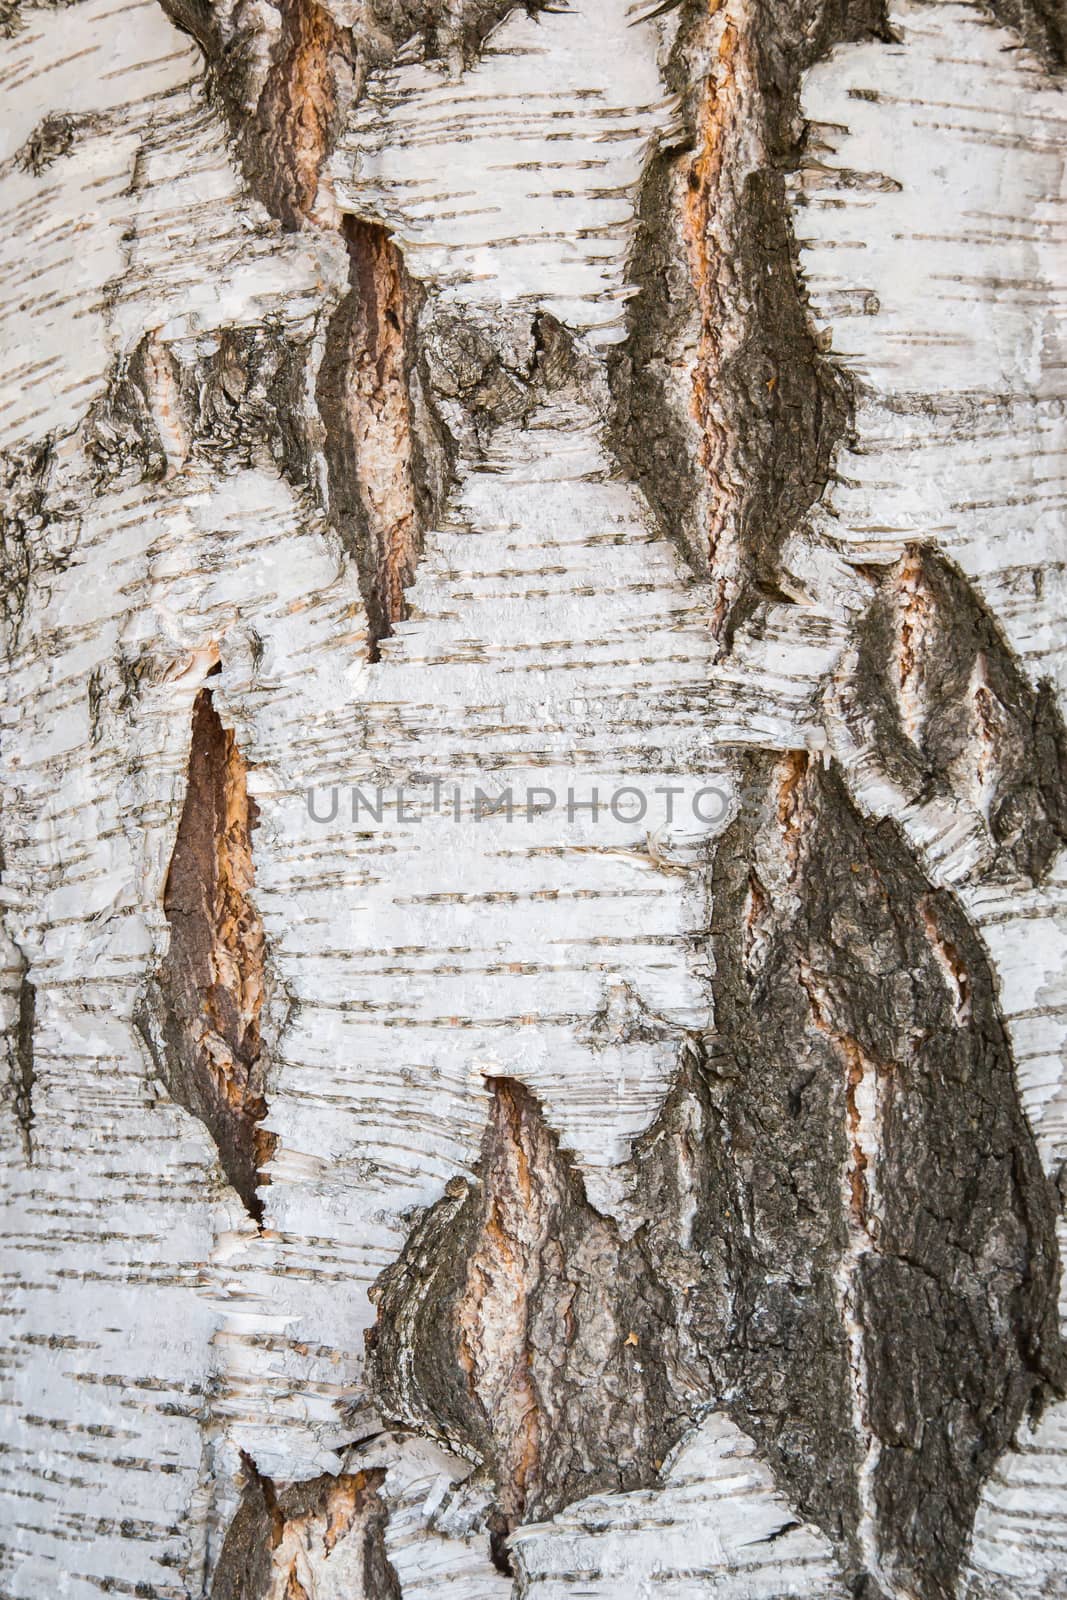 A texture of wood, also suitable as a background